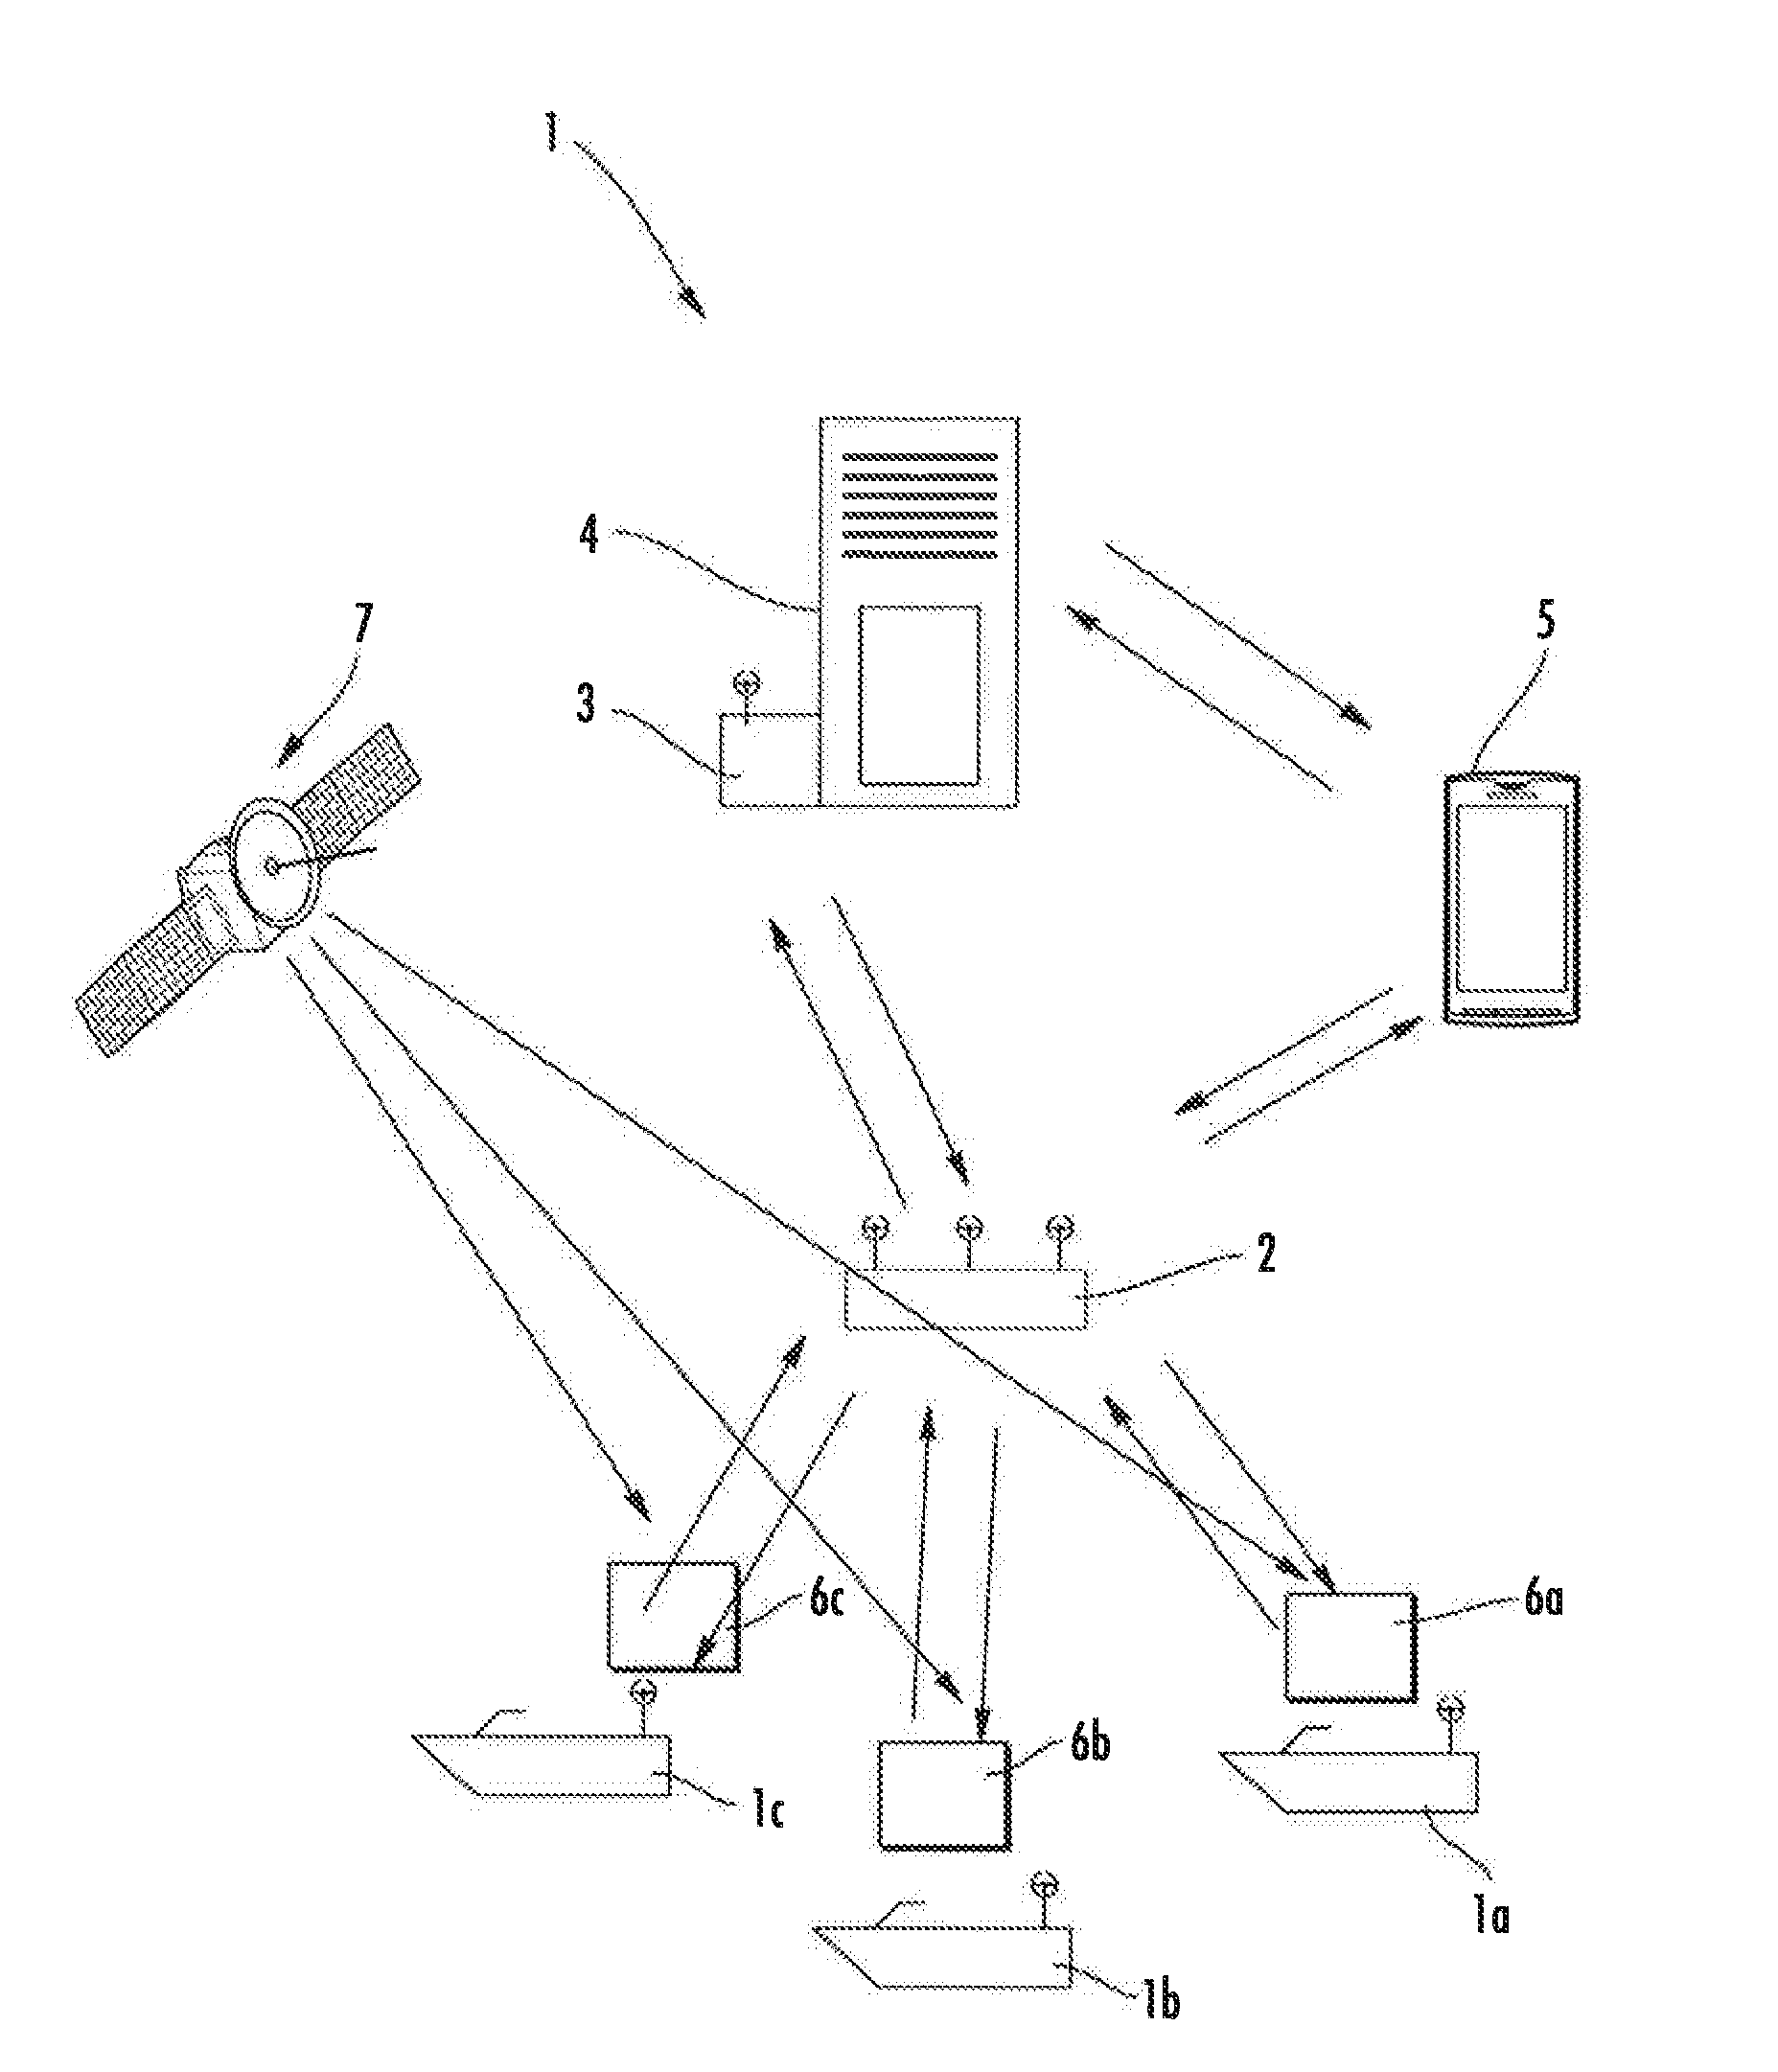 System and method for tracking, surveillance and remote control of powered personal recreational vehicles